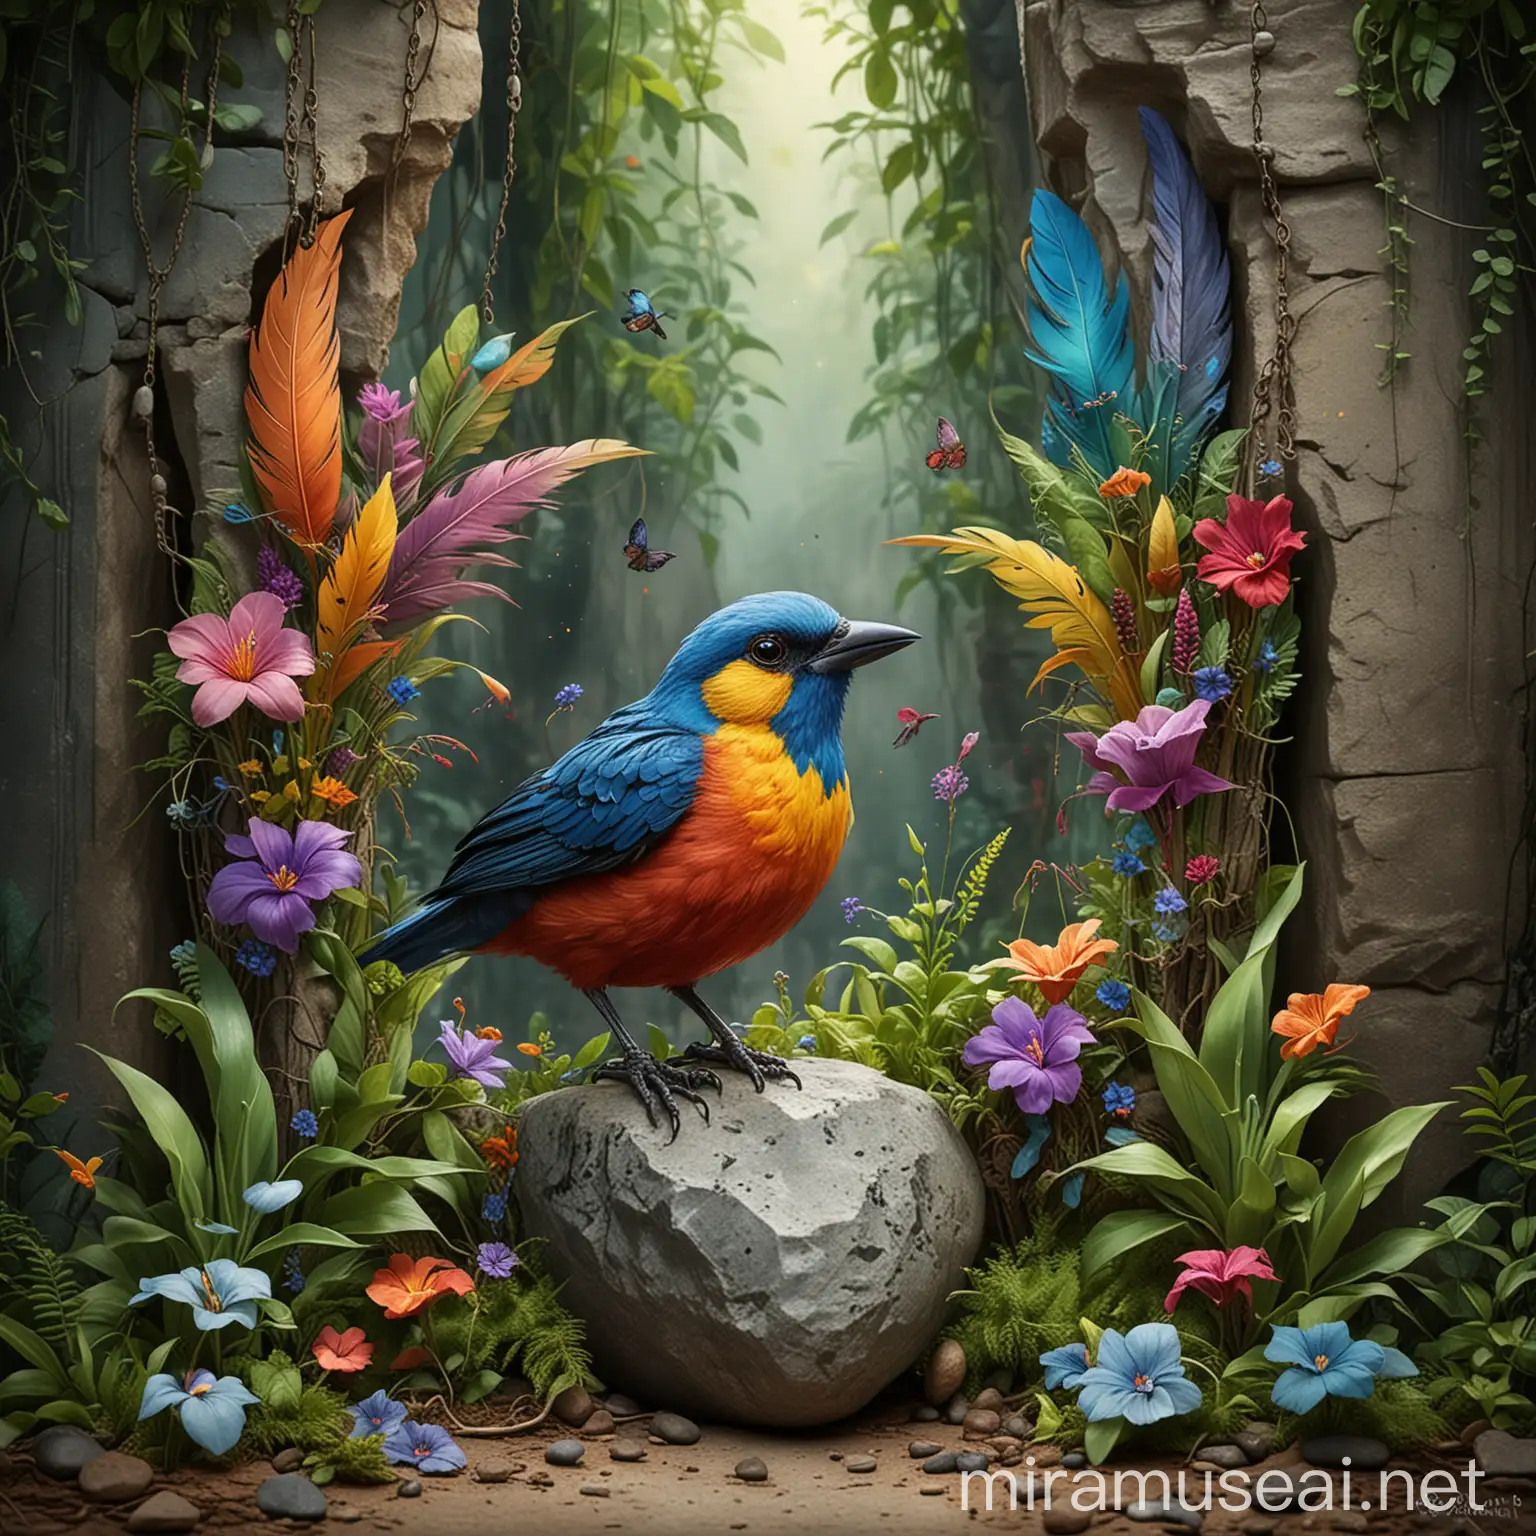 Colorful Bird Breaking Free from Addiction in Vibrant Jungle with Stone Flowers